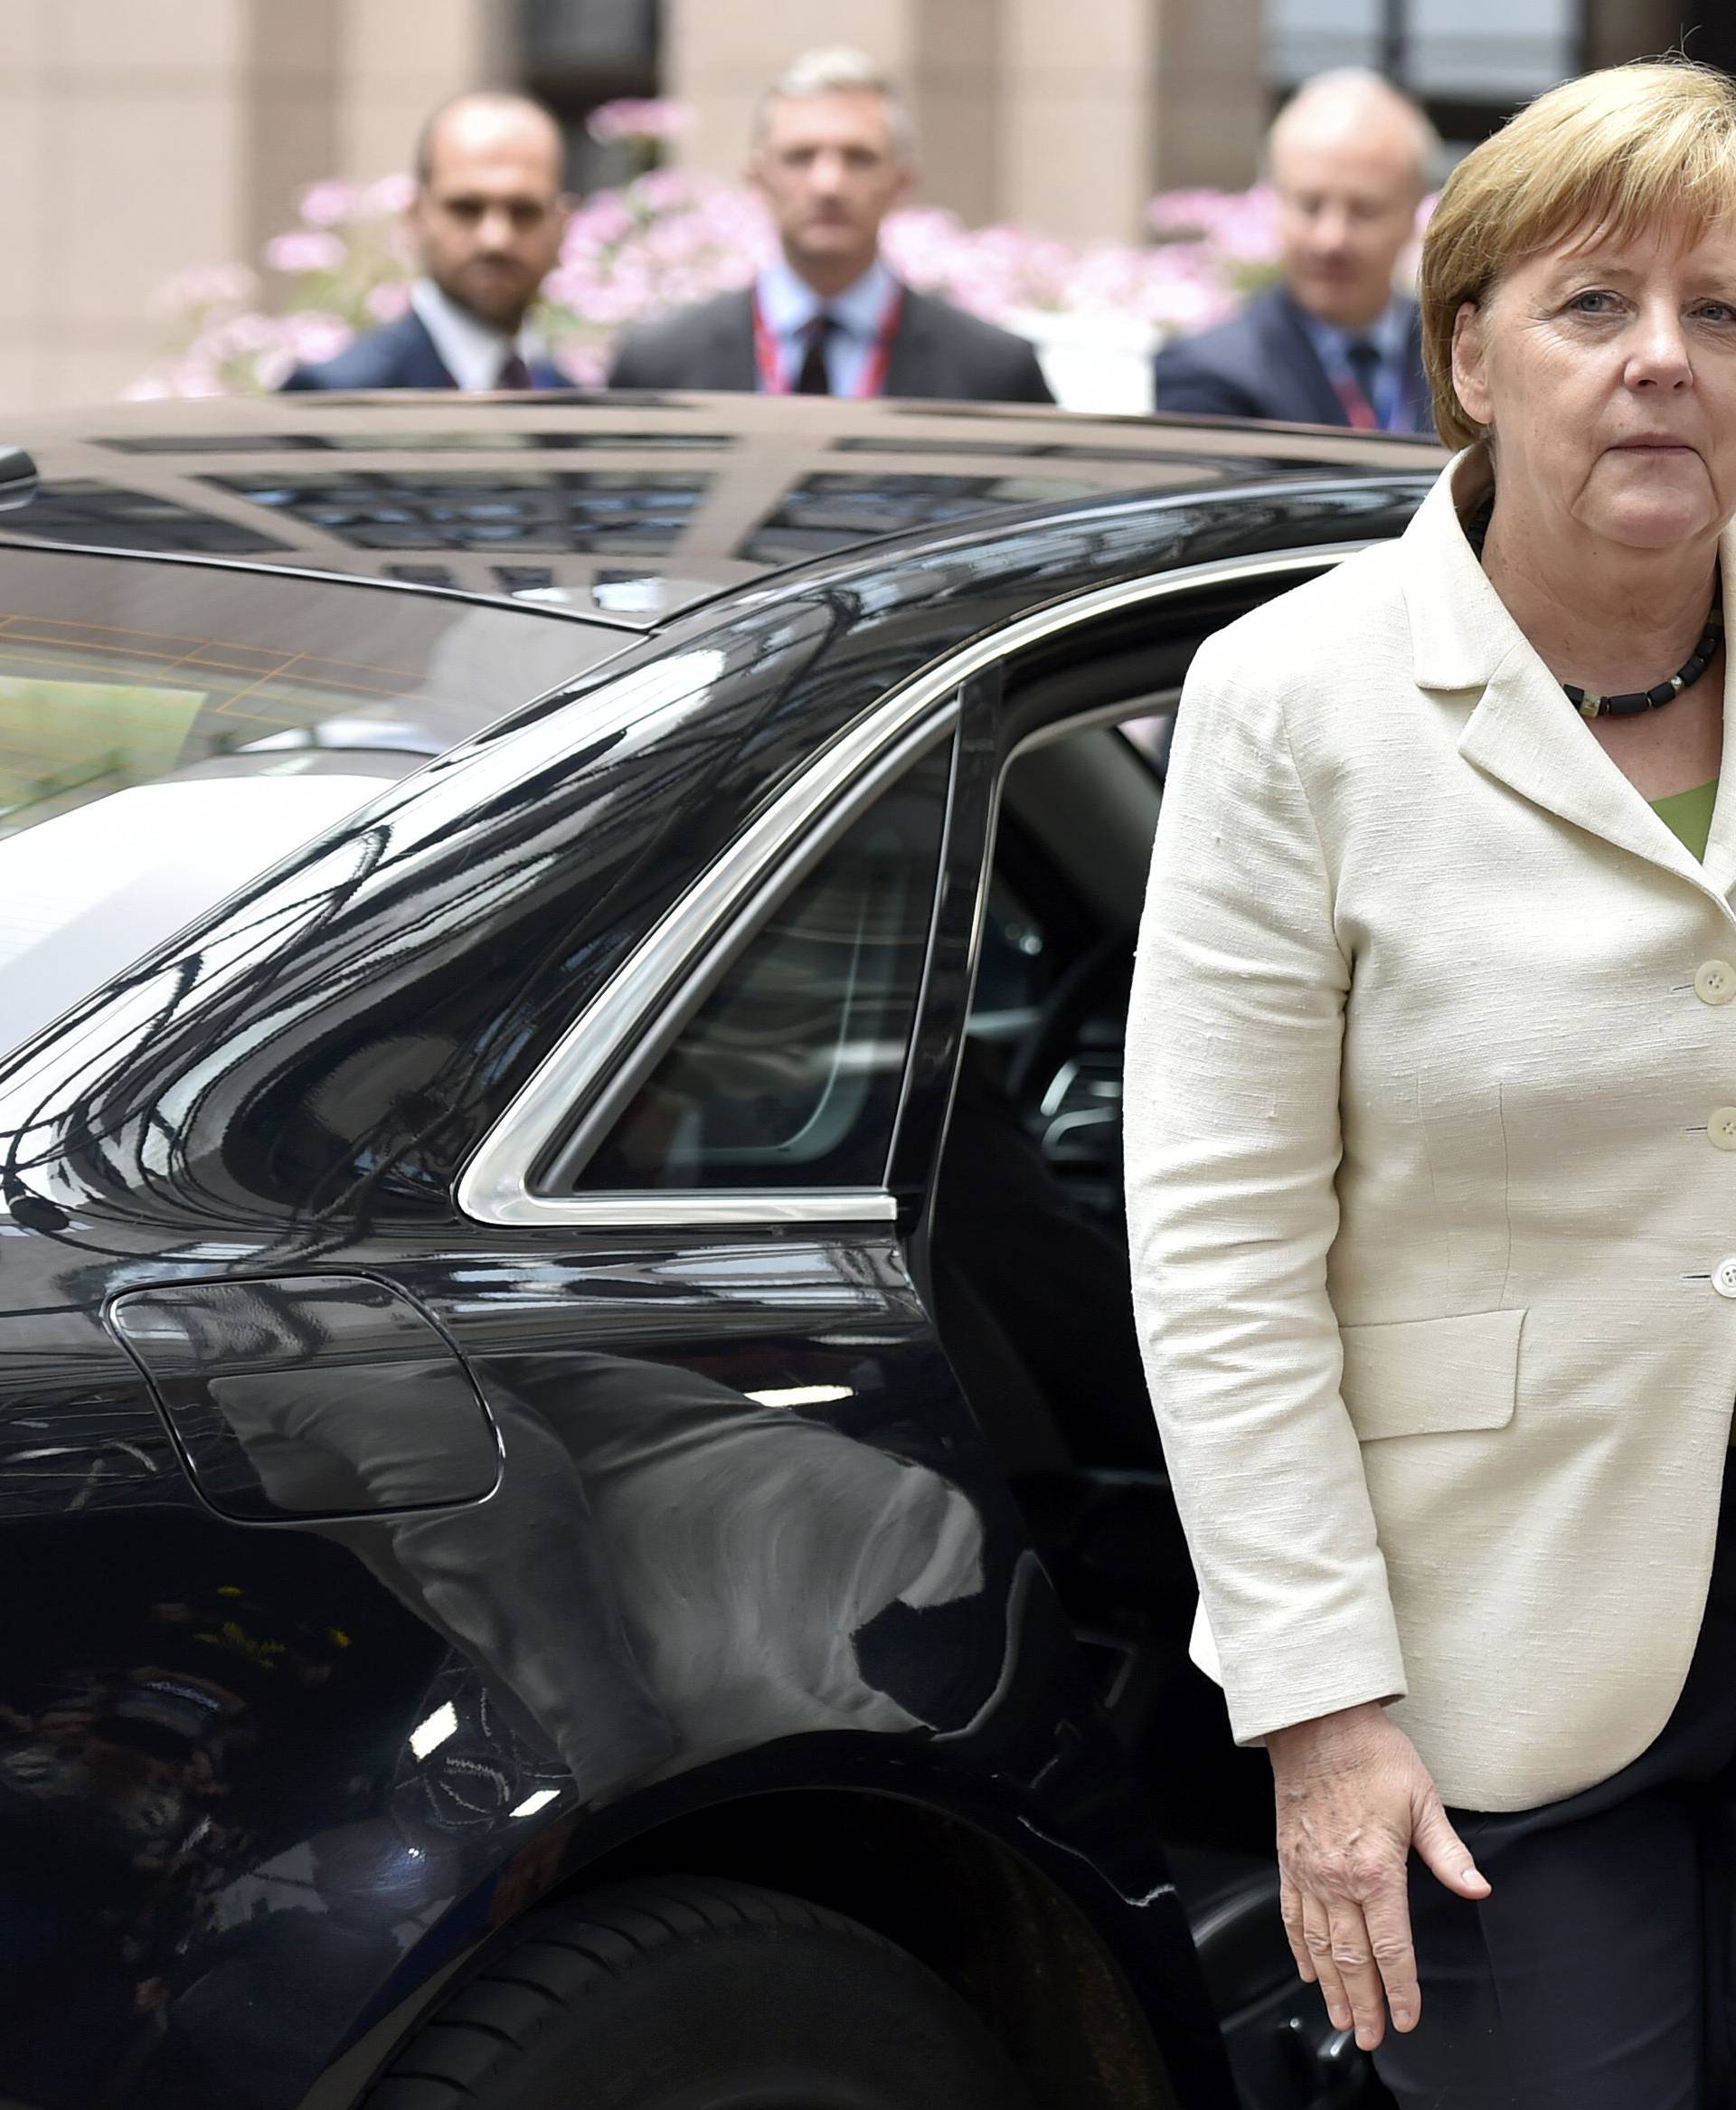 German Chancellor Merkel arrives at the EU Summit in Brussels